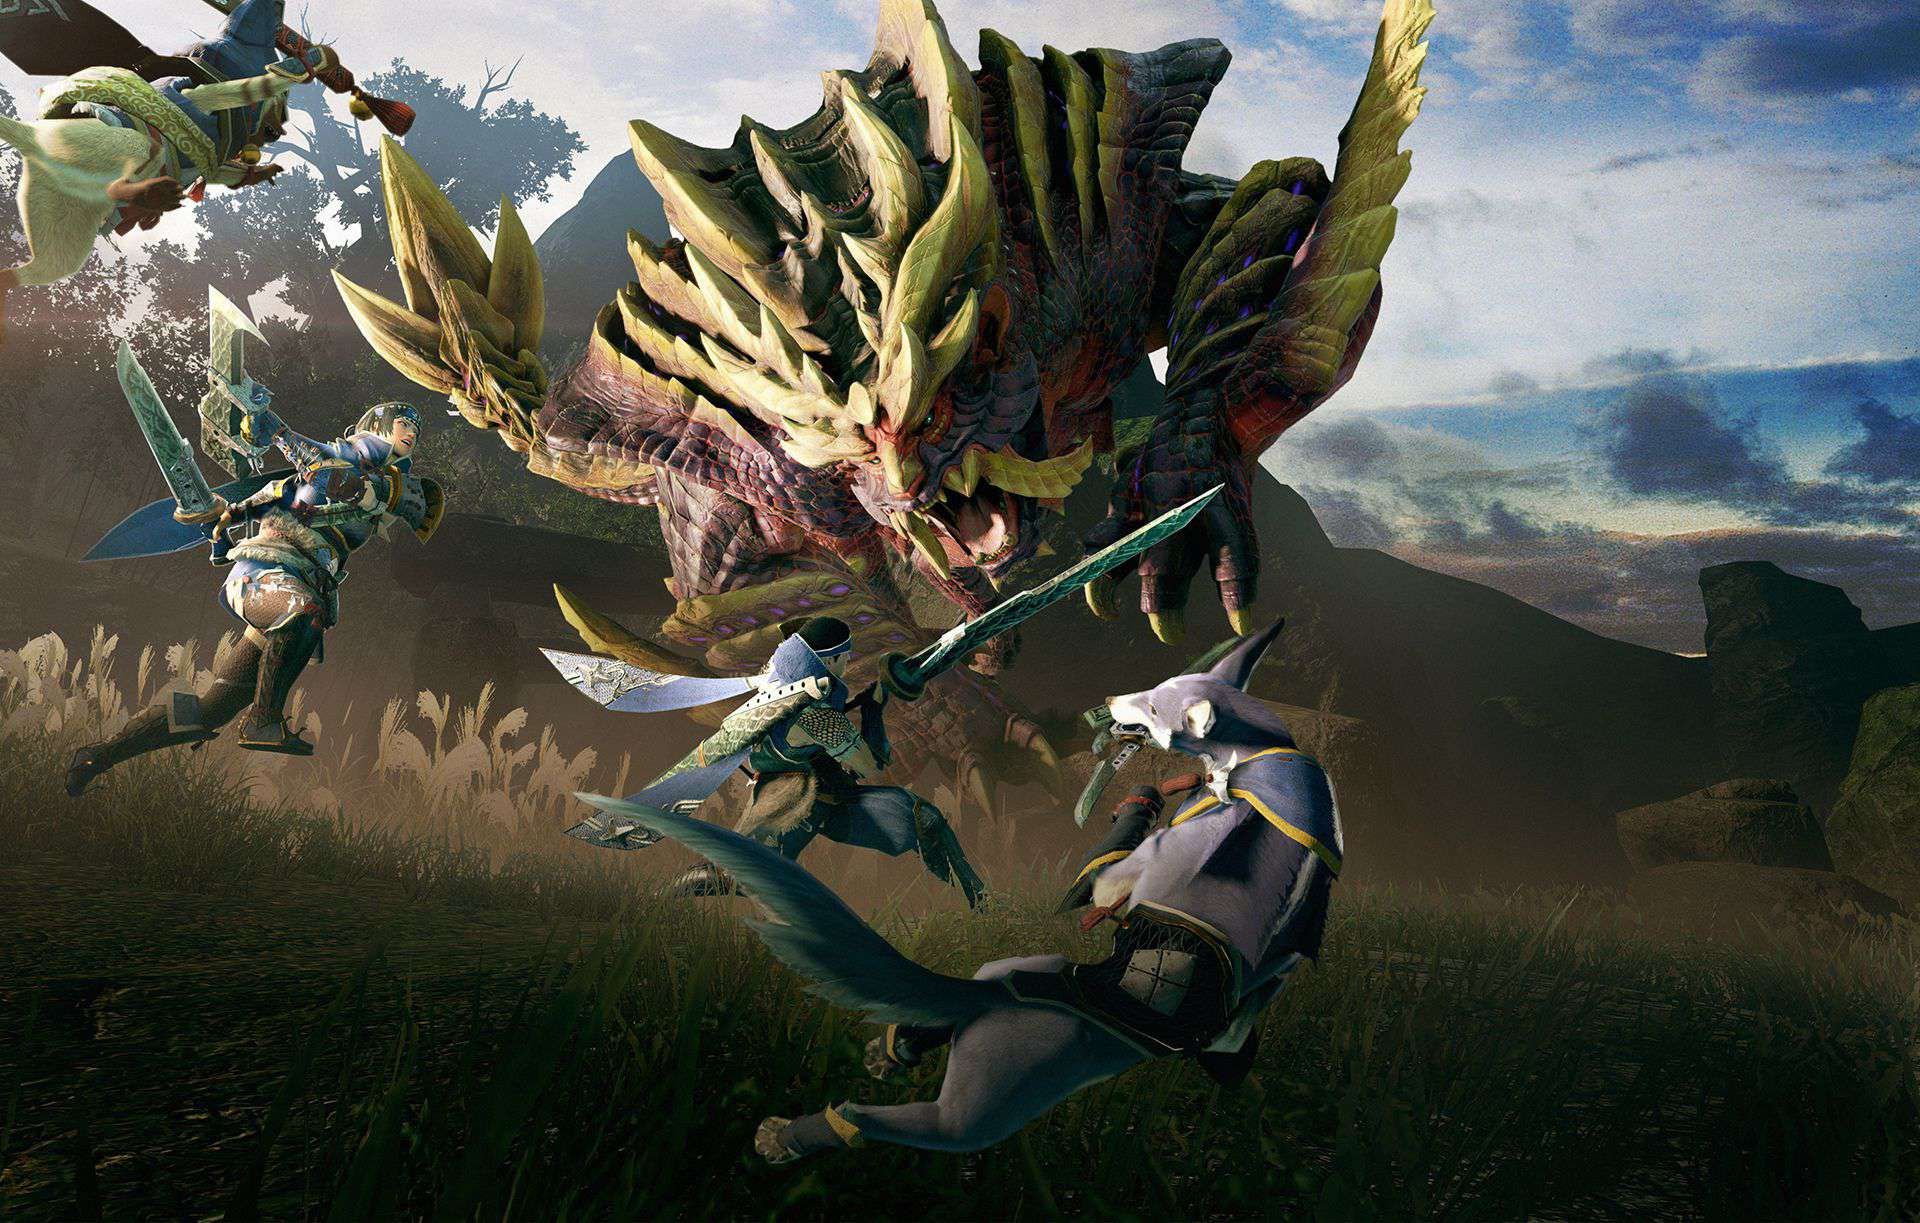 Monster Hunter - Hunters! We hope you all have a peaceful Easter